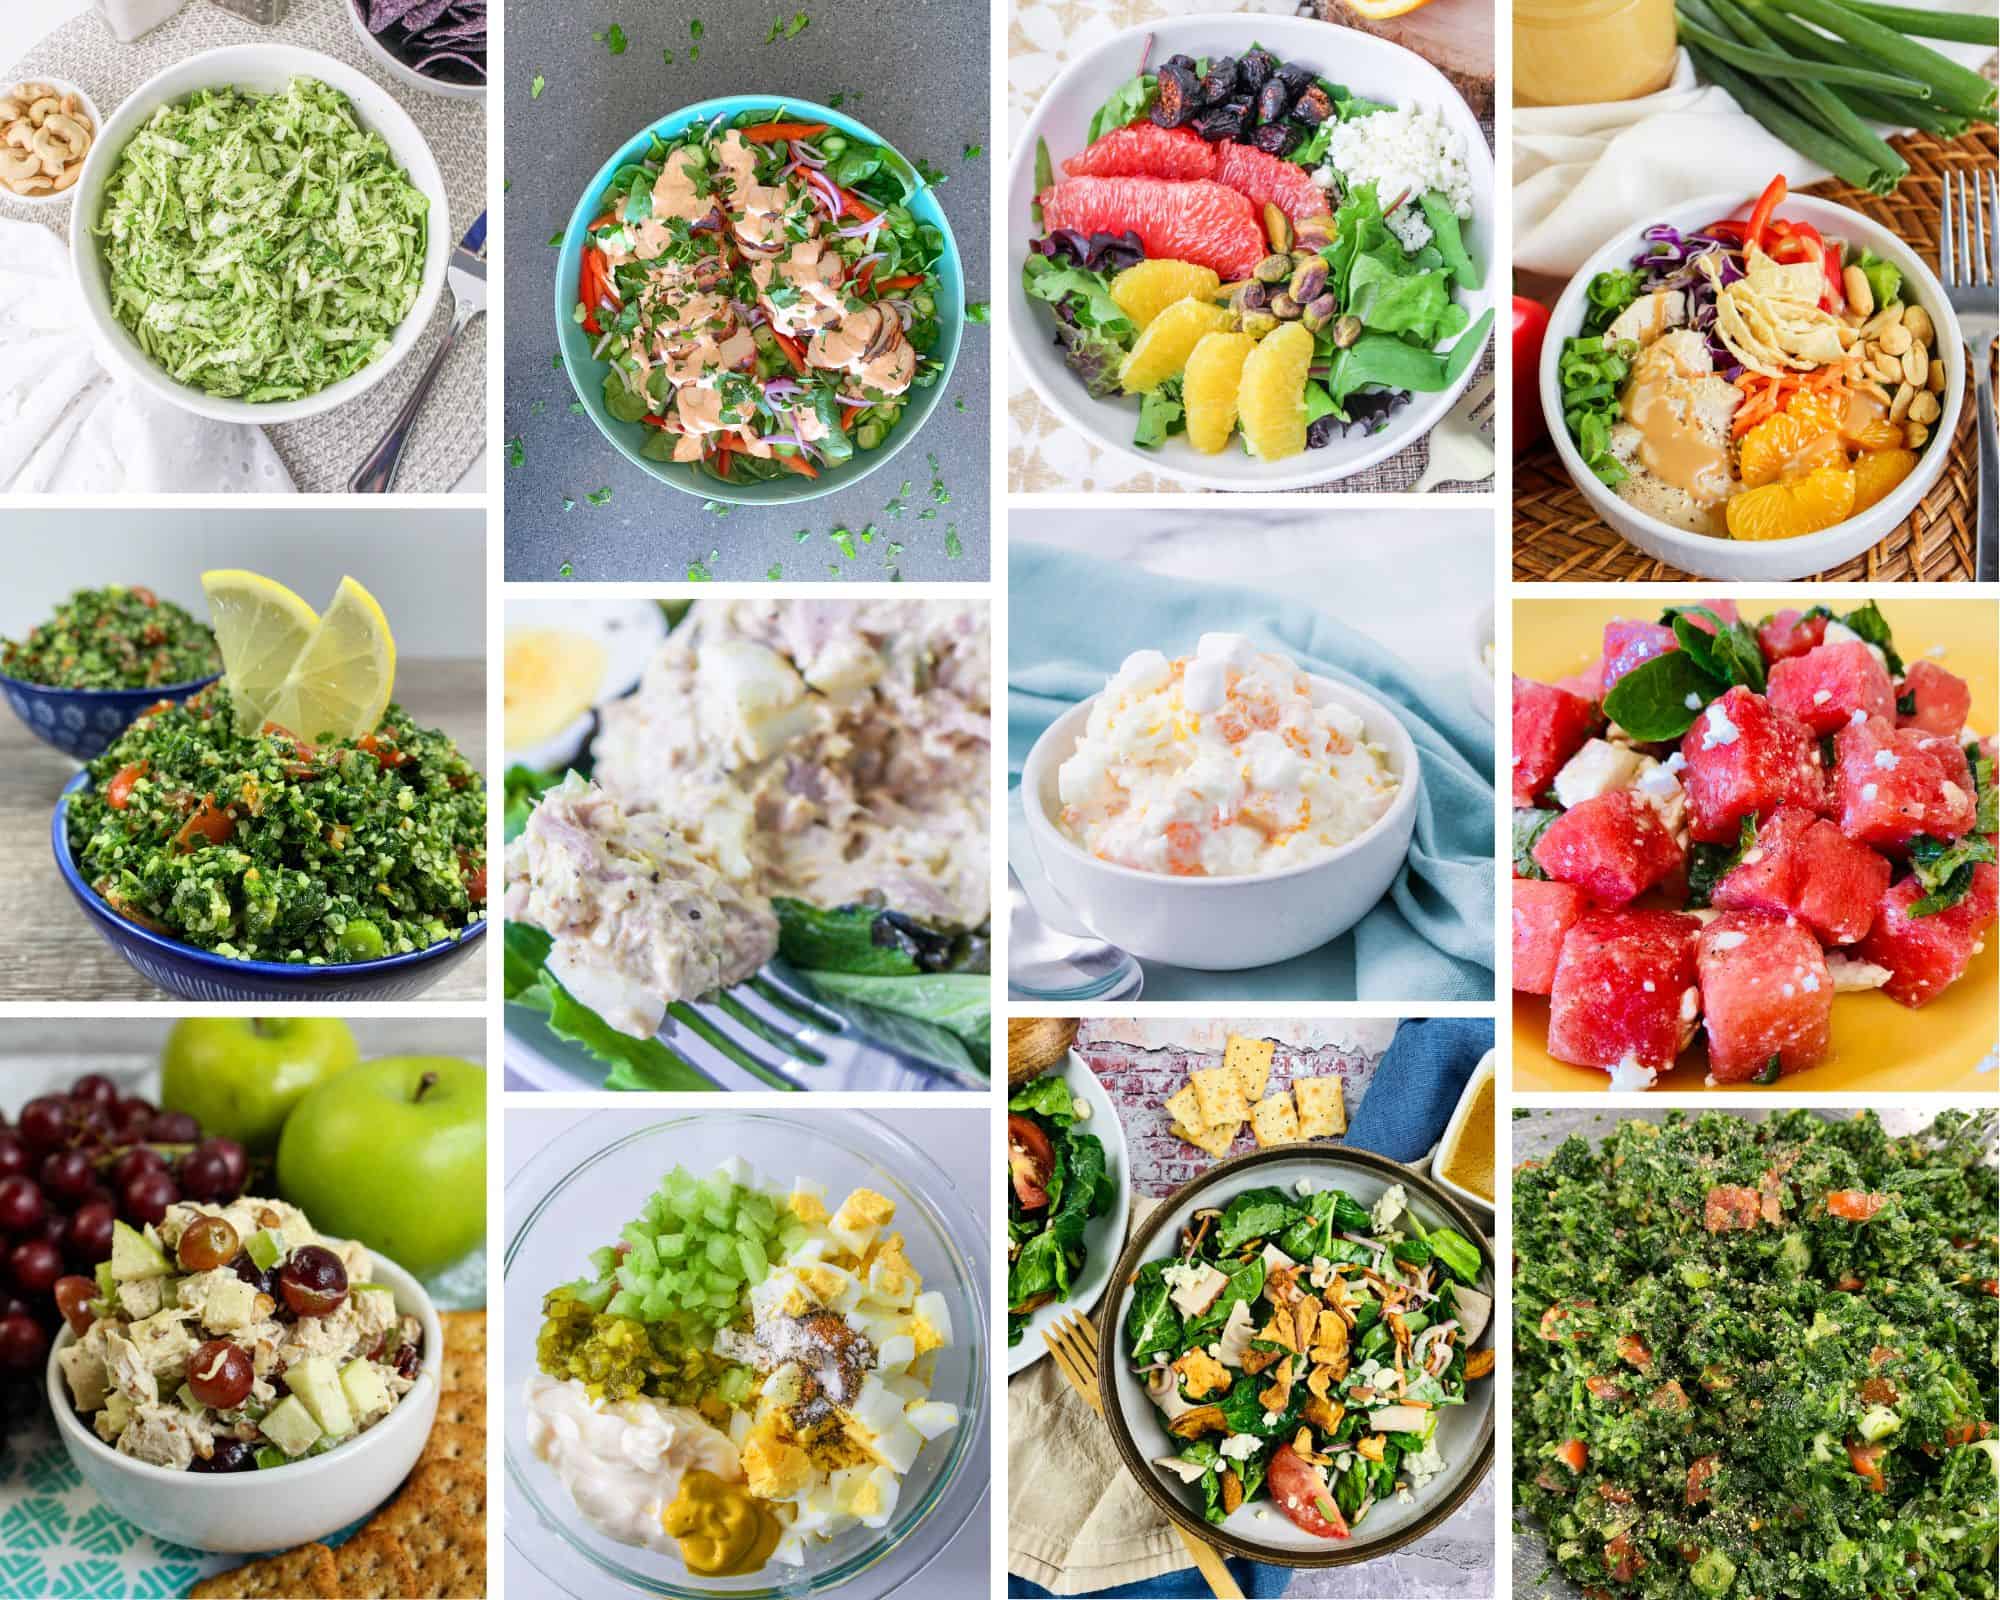 Searching for easy yet spectacular salads you can make in just minutes? There are so many delicious and satisfying options that we rounded up our favorites. These salad recipes will fill you up and satisfy your cravings. Check them out!